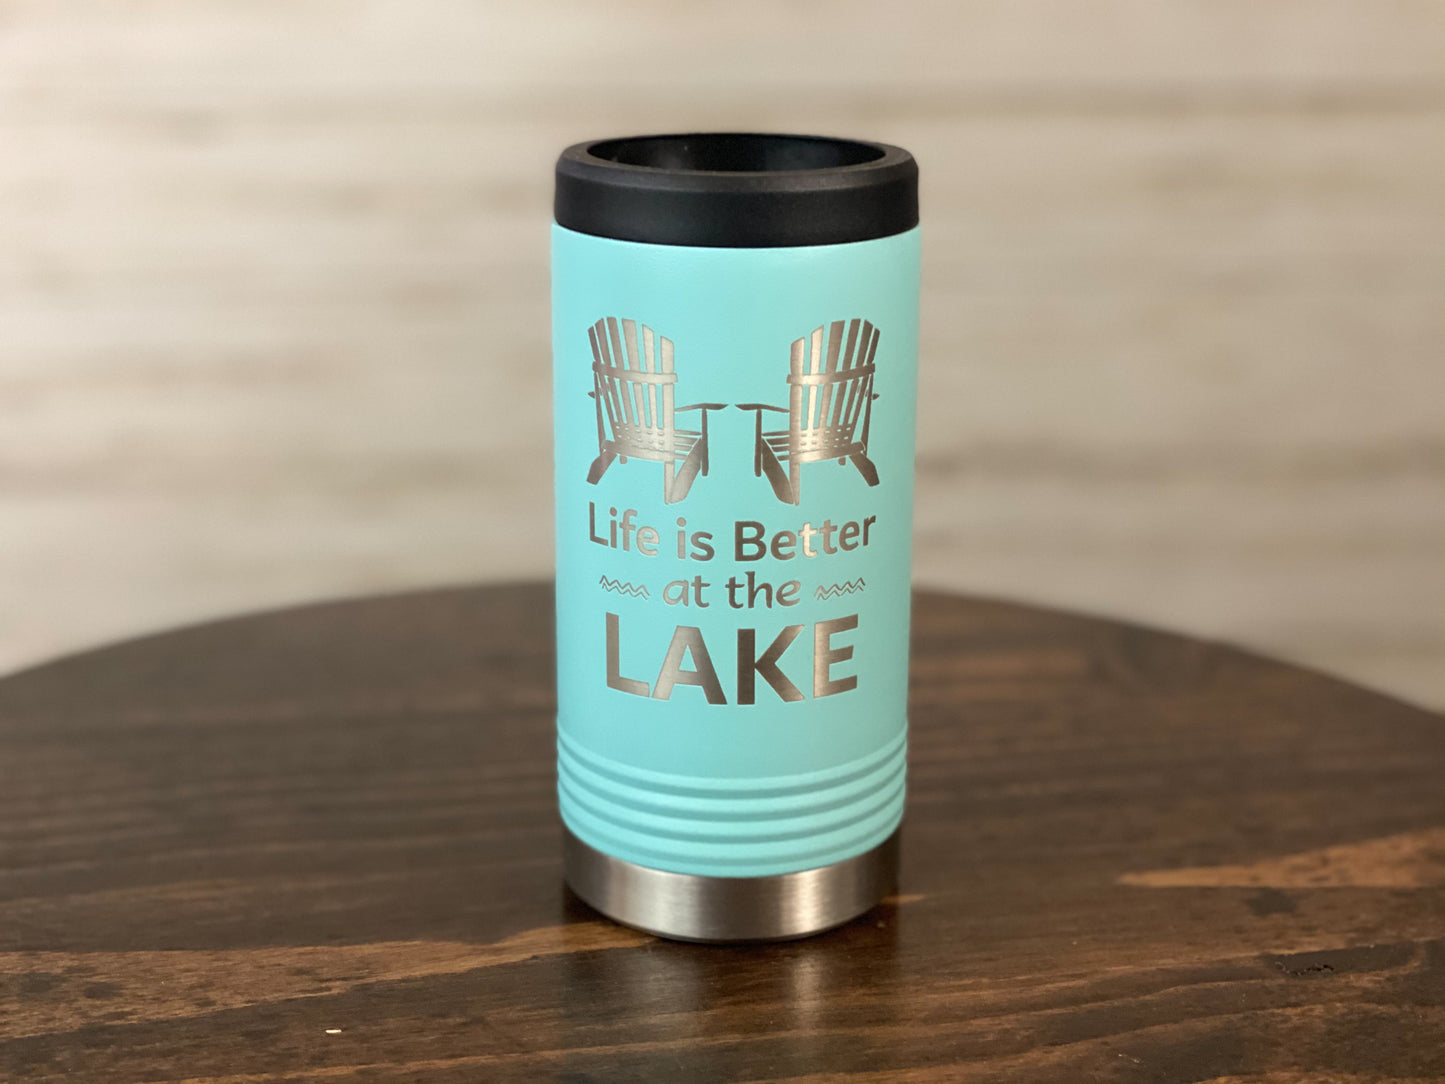 Life is Better at the Lake with Chairs - Insulated Slim Can Holder